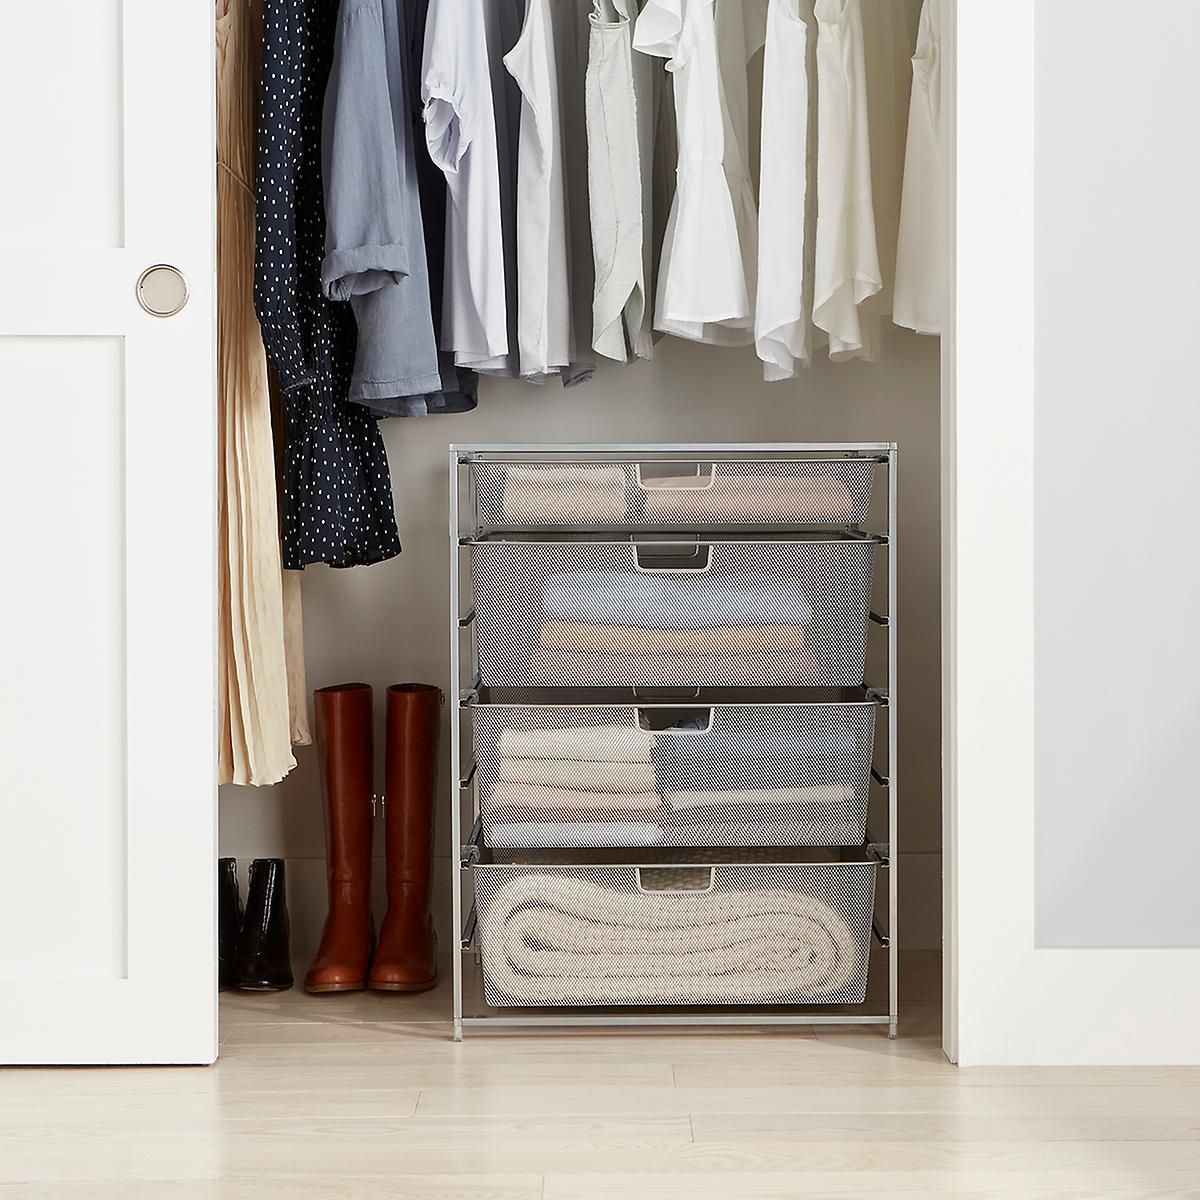 35 Best Closet Organization Ideas To Maximize Space Pertaining To Drawers And Shelves For Wardrobes (View 3 of 15)